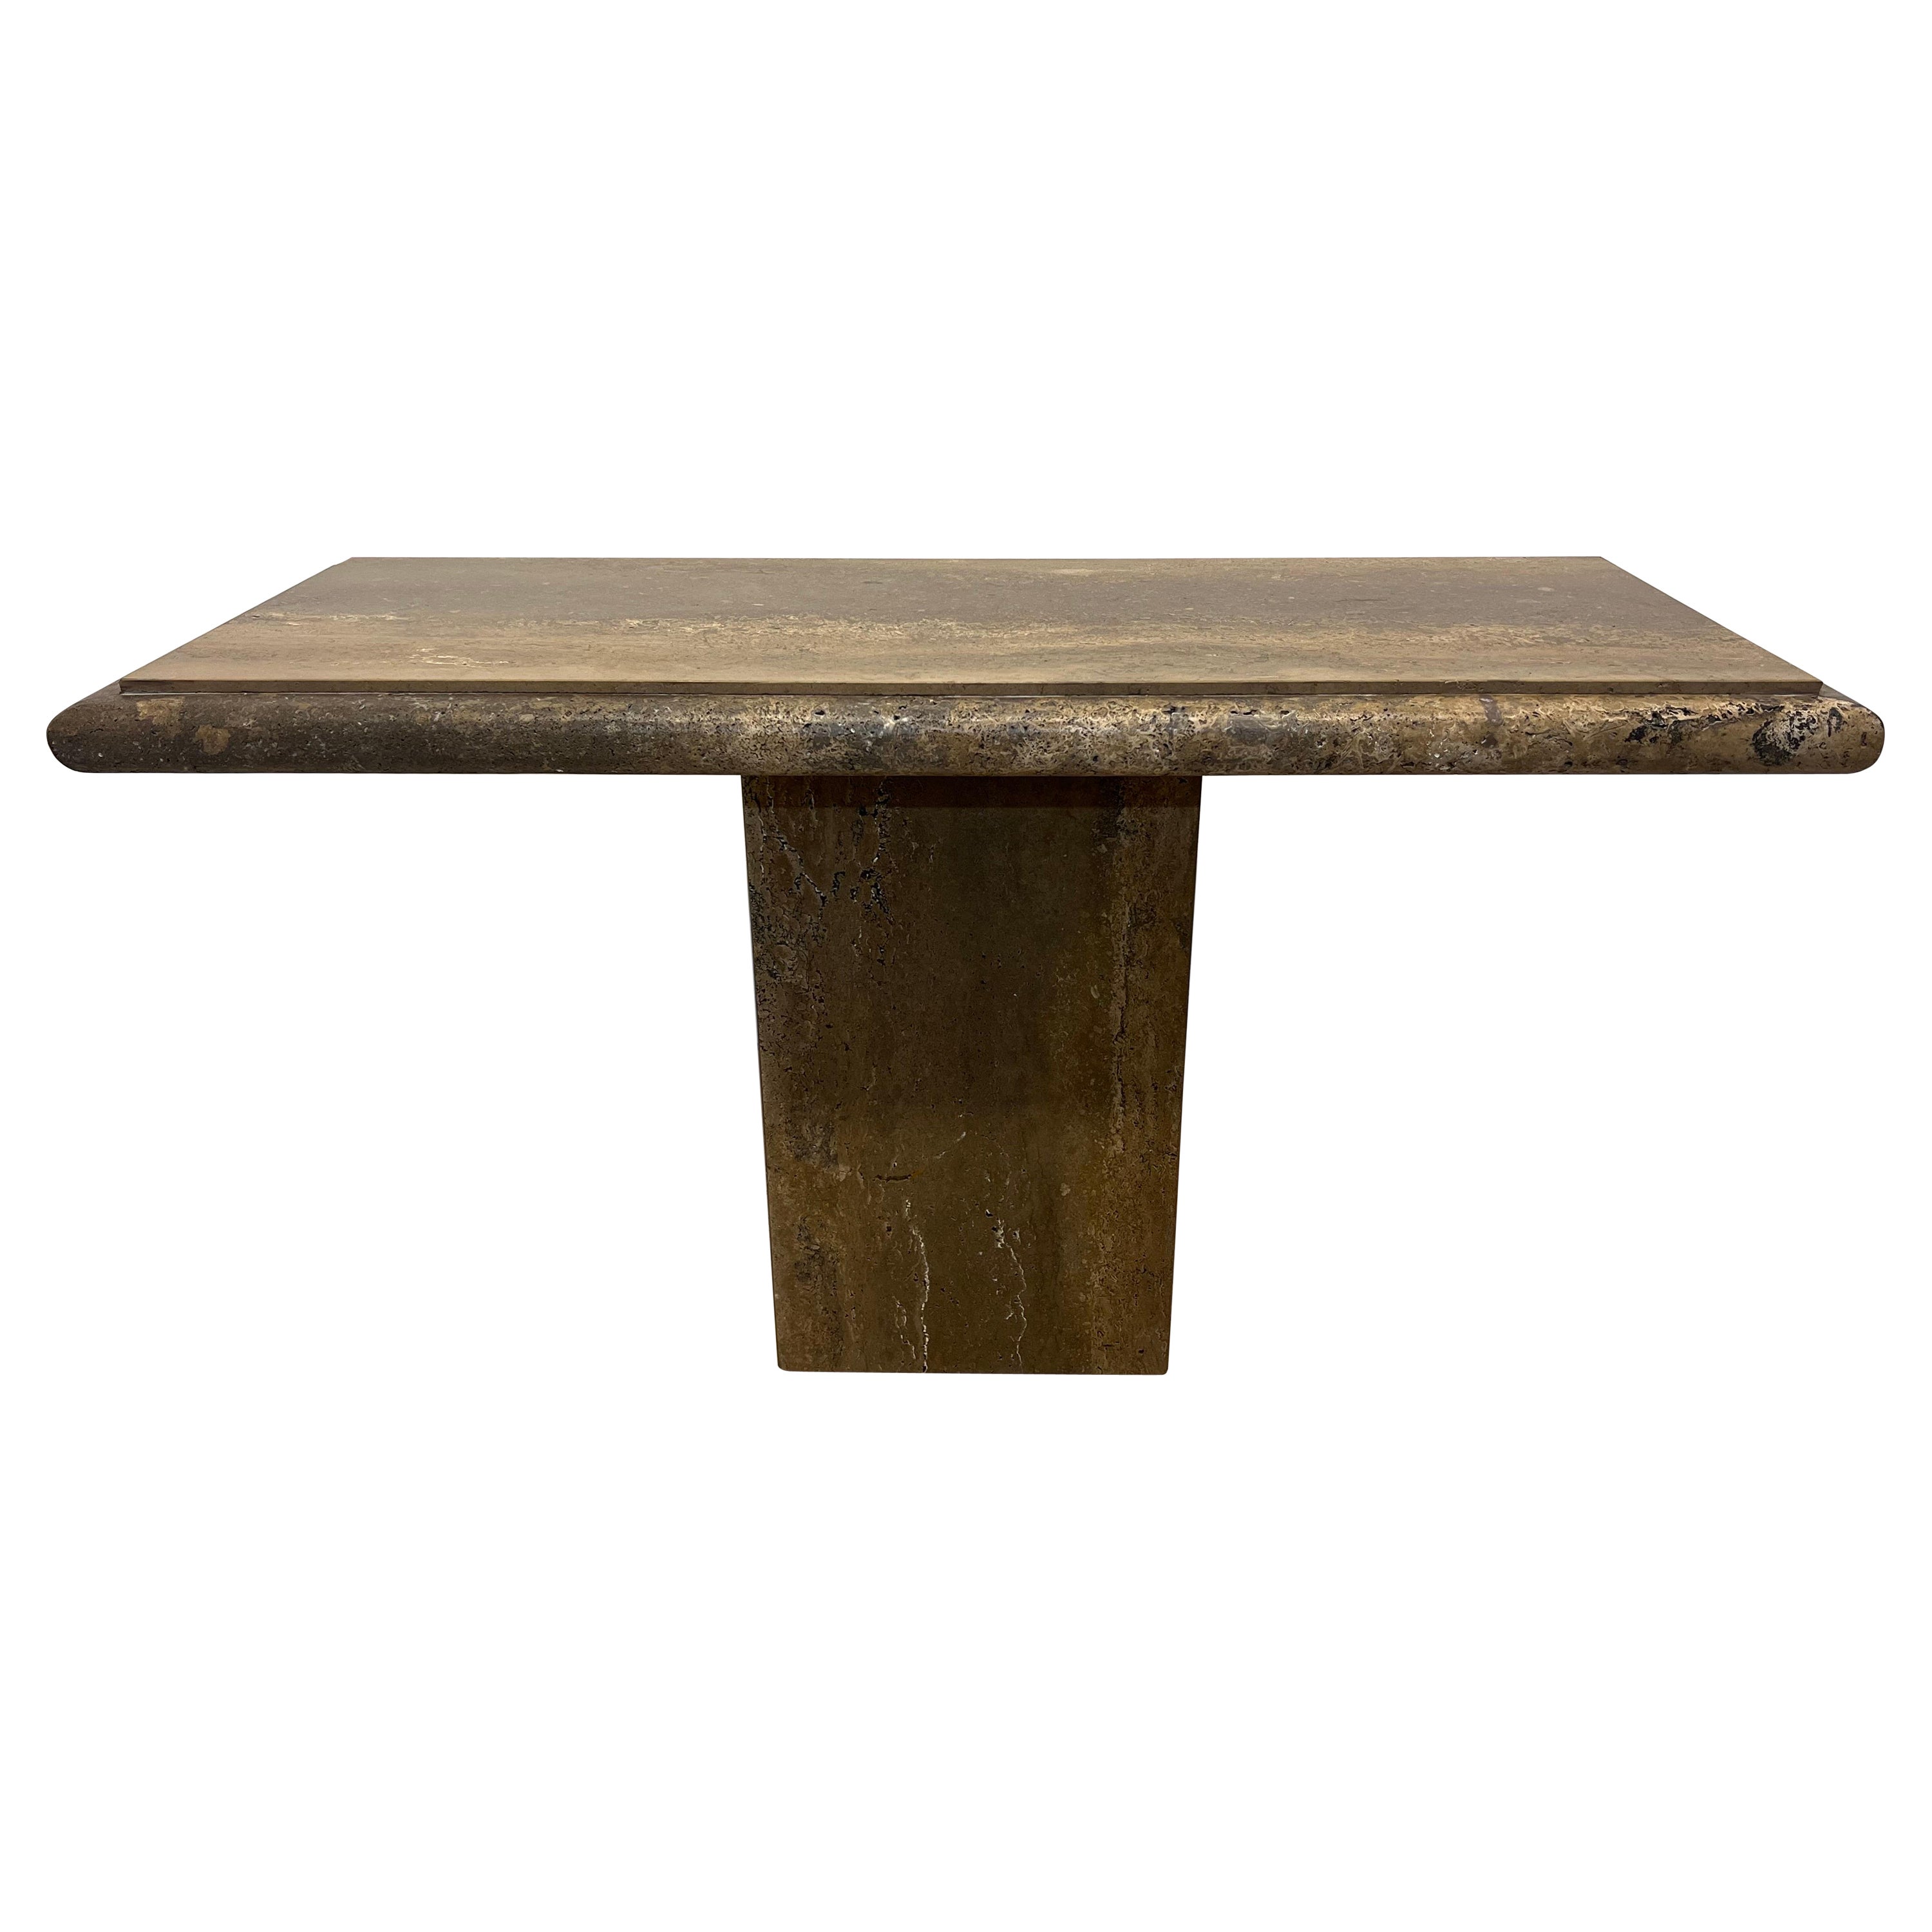 Polished Italian Travertine Bullnose Console Table, Italy 1970s For Sale